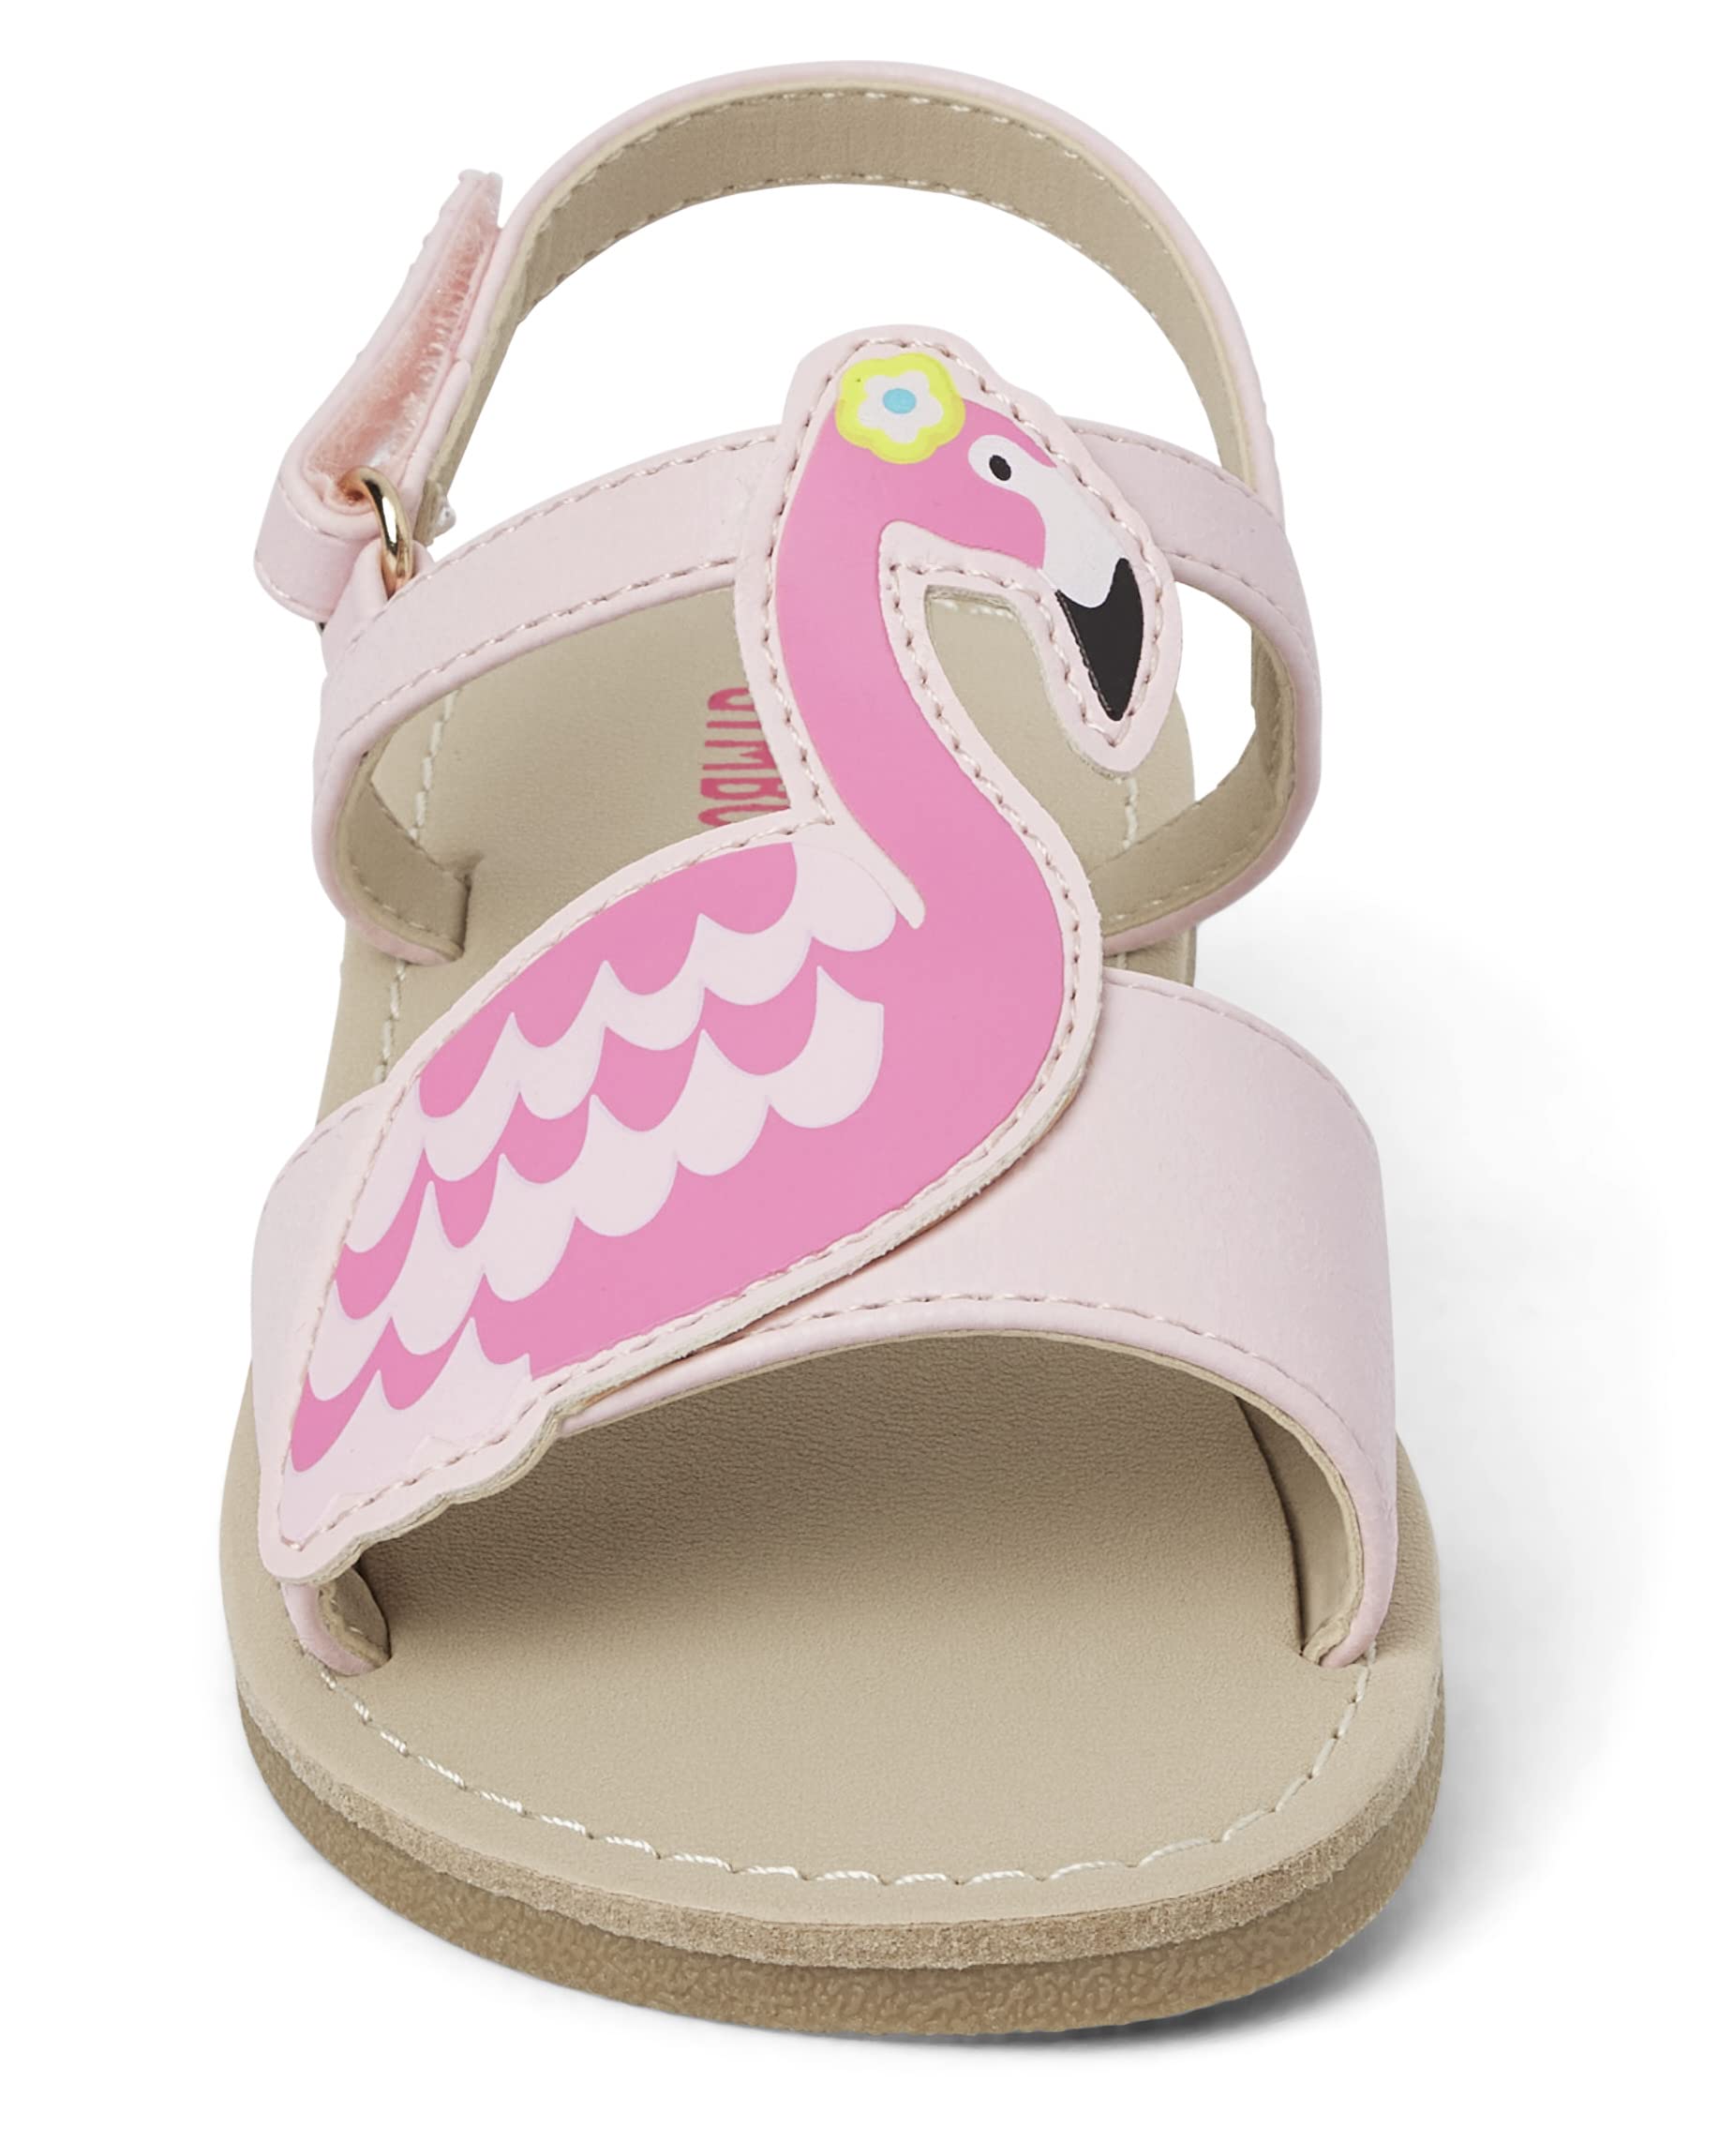 Gymboree Girl's and Toddler Flat Sandals